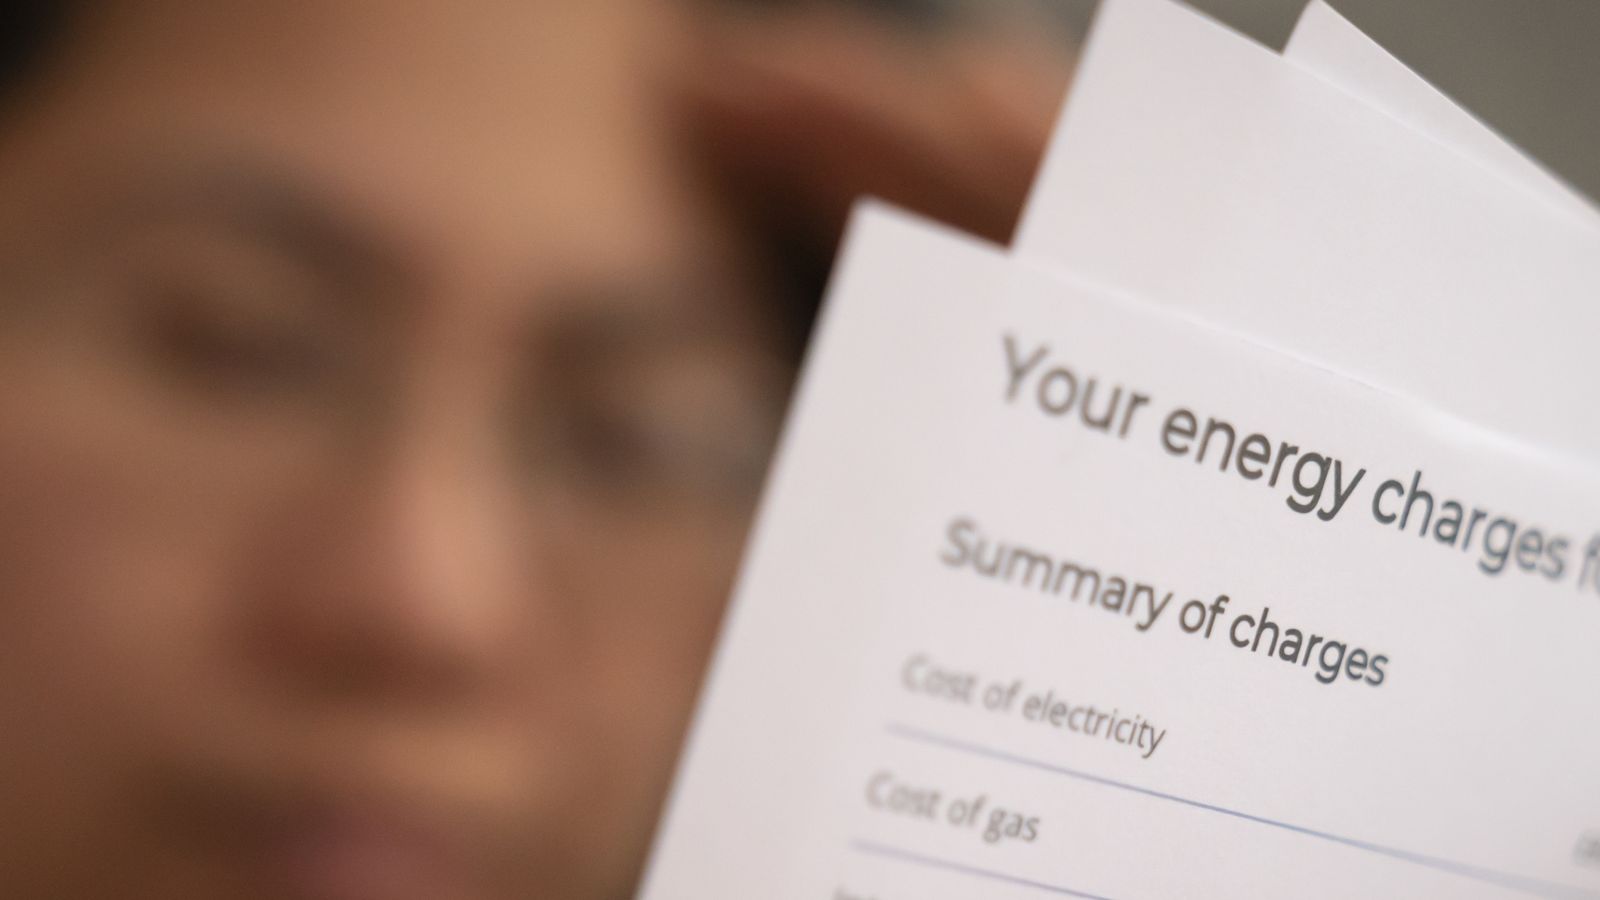 Households paying £94 extra on energy bills because Ofgem 'too slow to act'